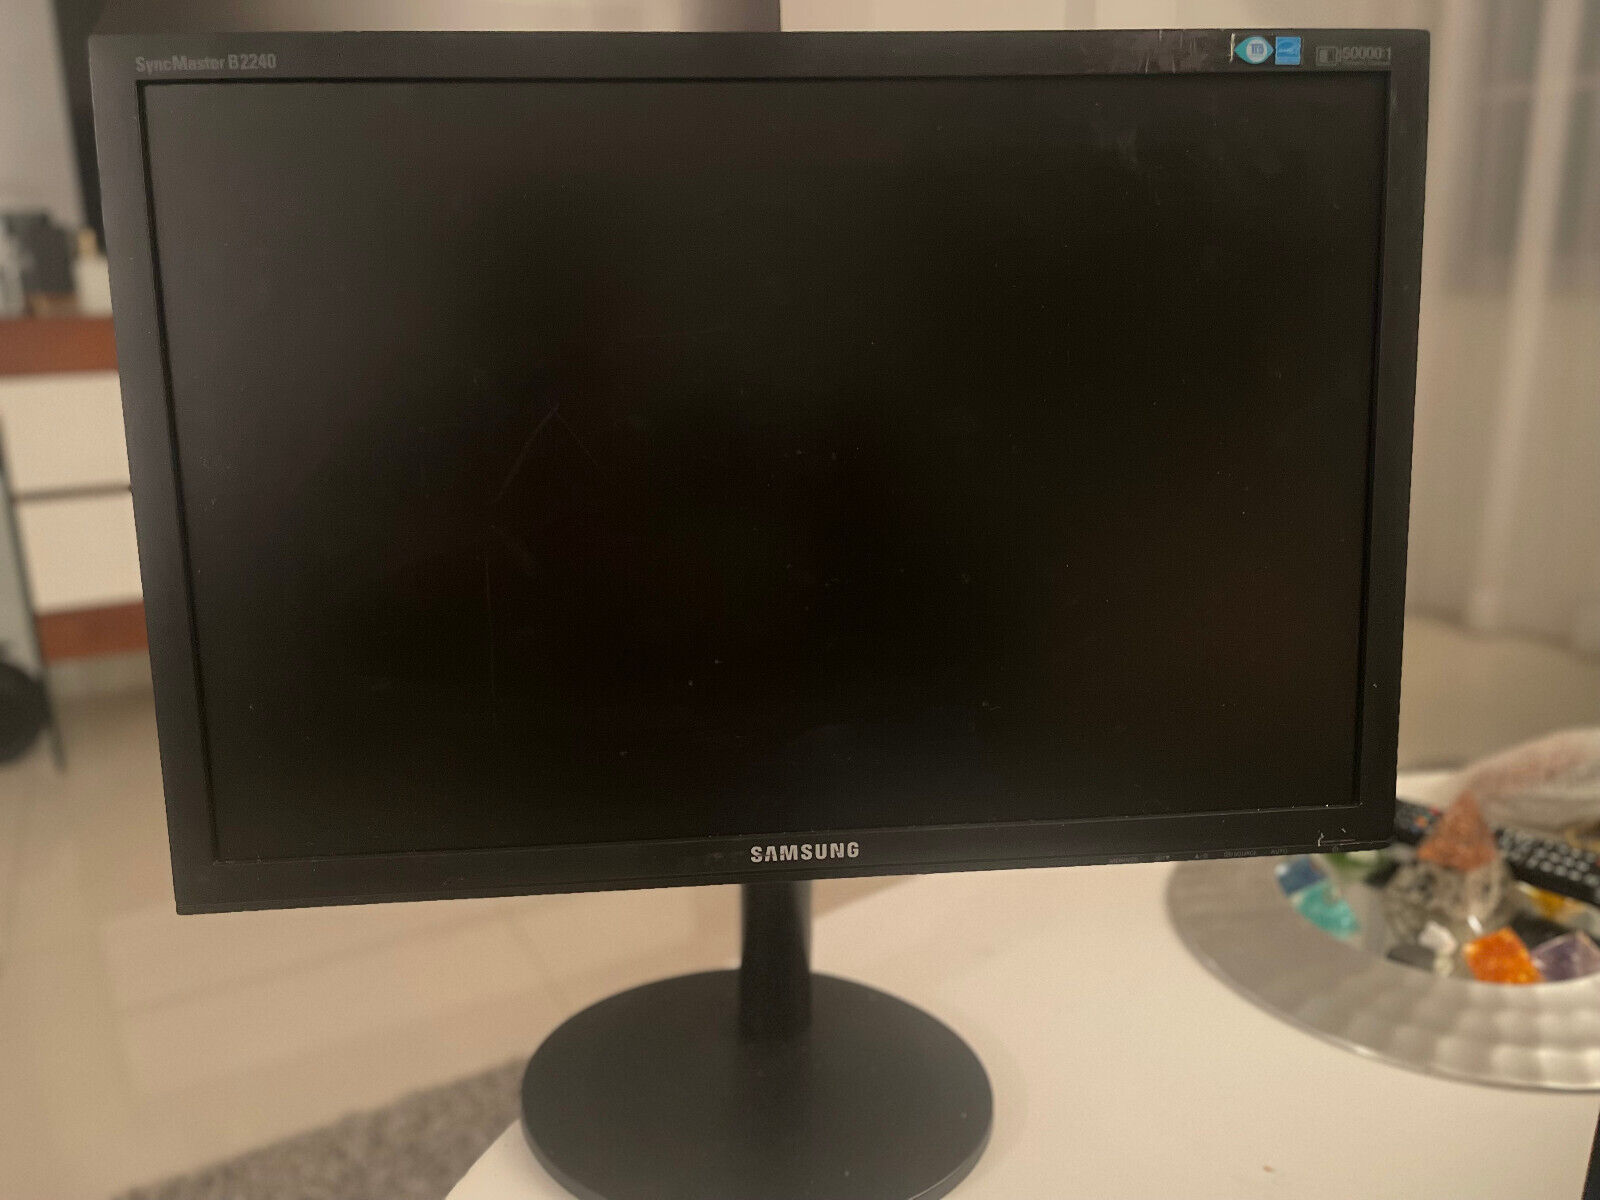  Samsung B2240EW LCD Monitor - Pre-Owned, Works perfectly